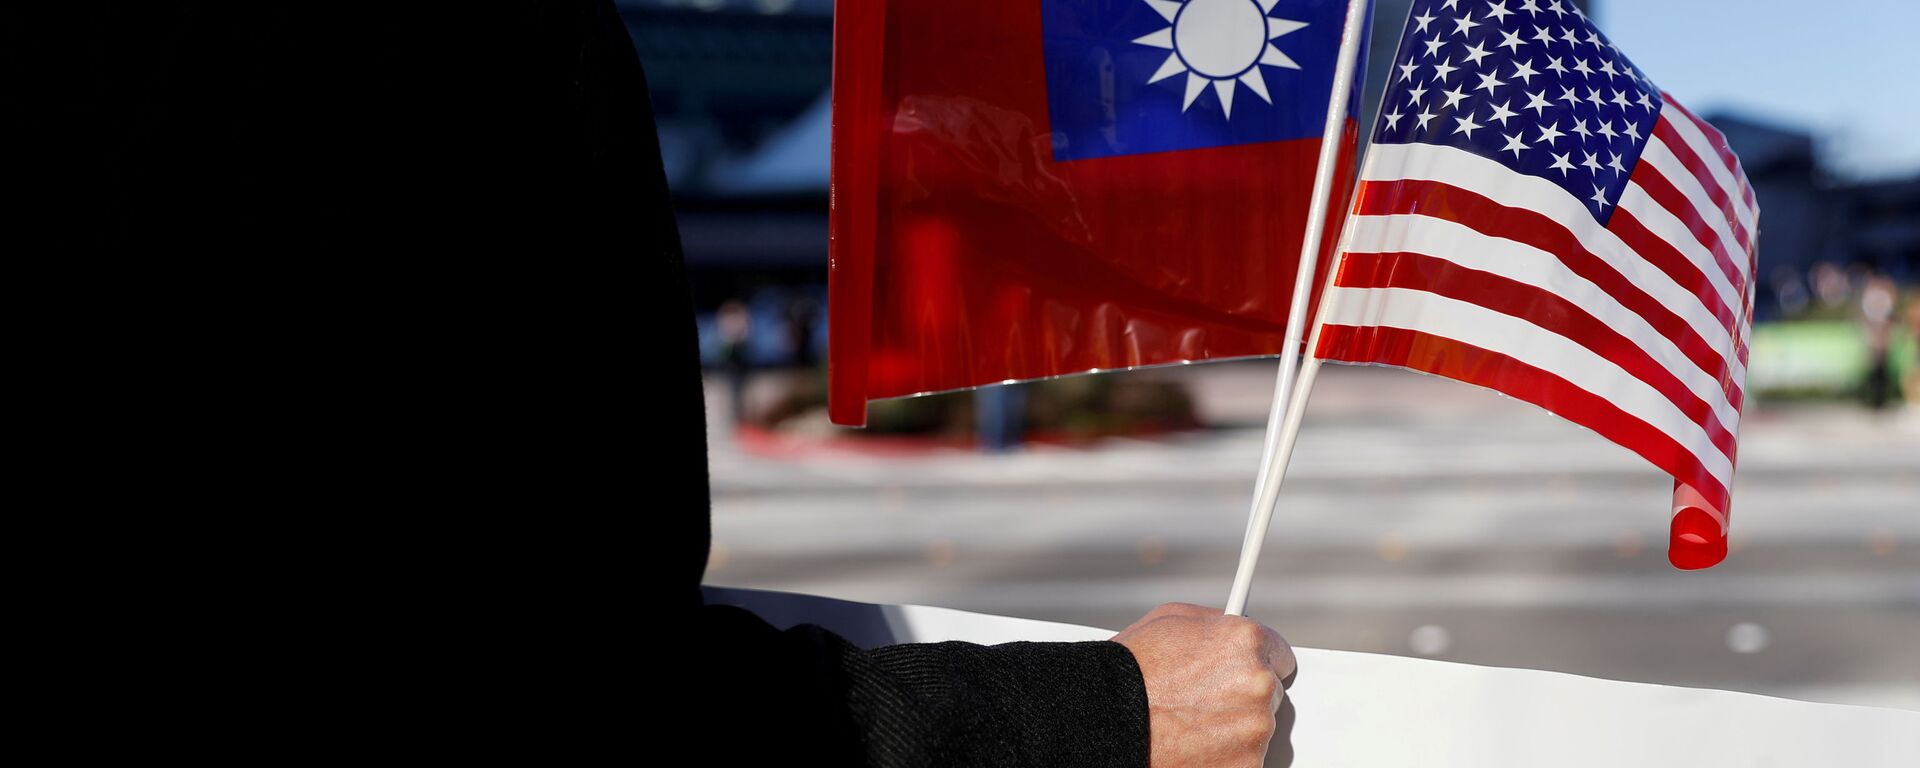 A demonstrator holds flags of Taiwan and the United States in support of Taiwanese President Tsai Ing-wen during an stop-over after her visit to Latin America in Burlingame, California, U.S., January 14, 2017. REUTERS/Stephen Lam/File Photo - Sputnik International, 1920, 07.10.2021